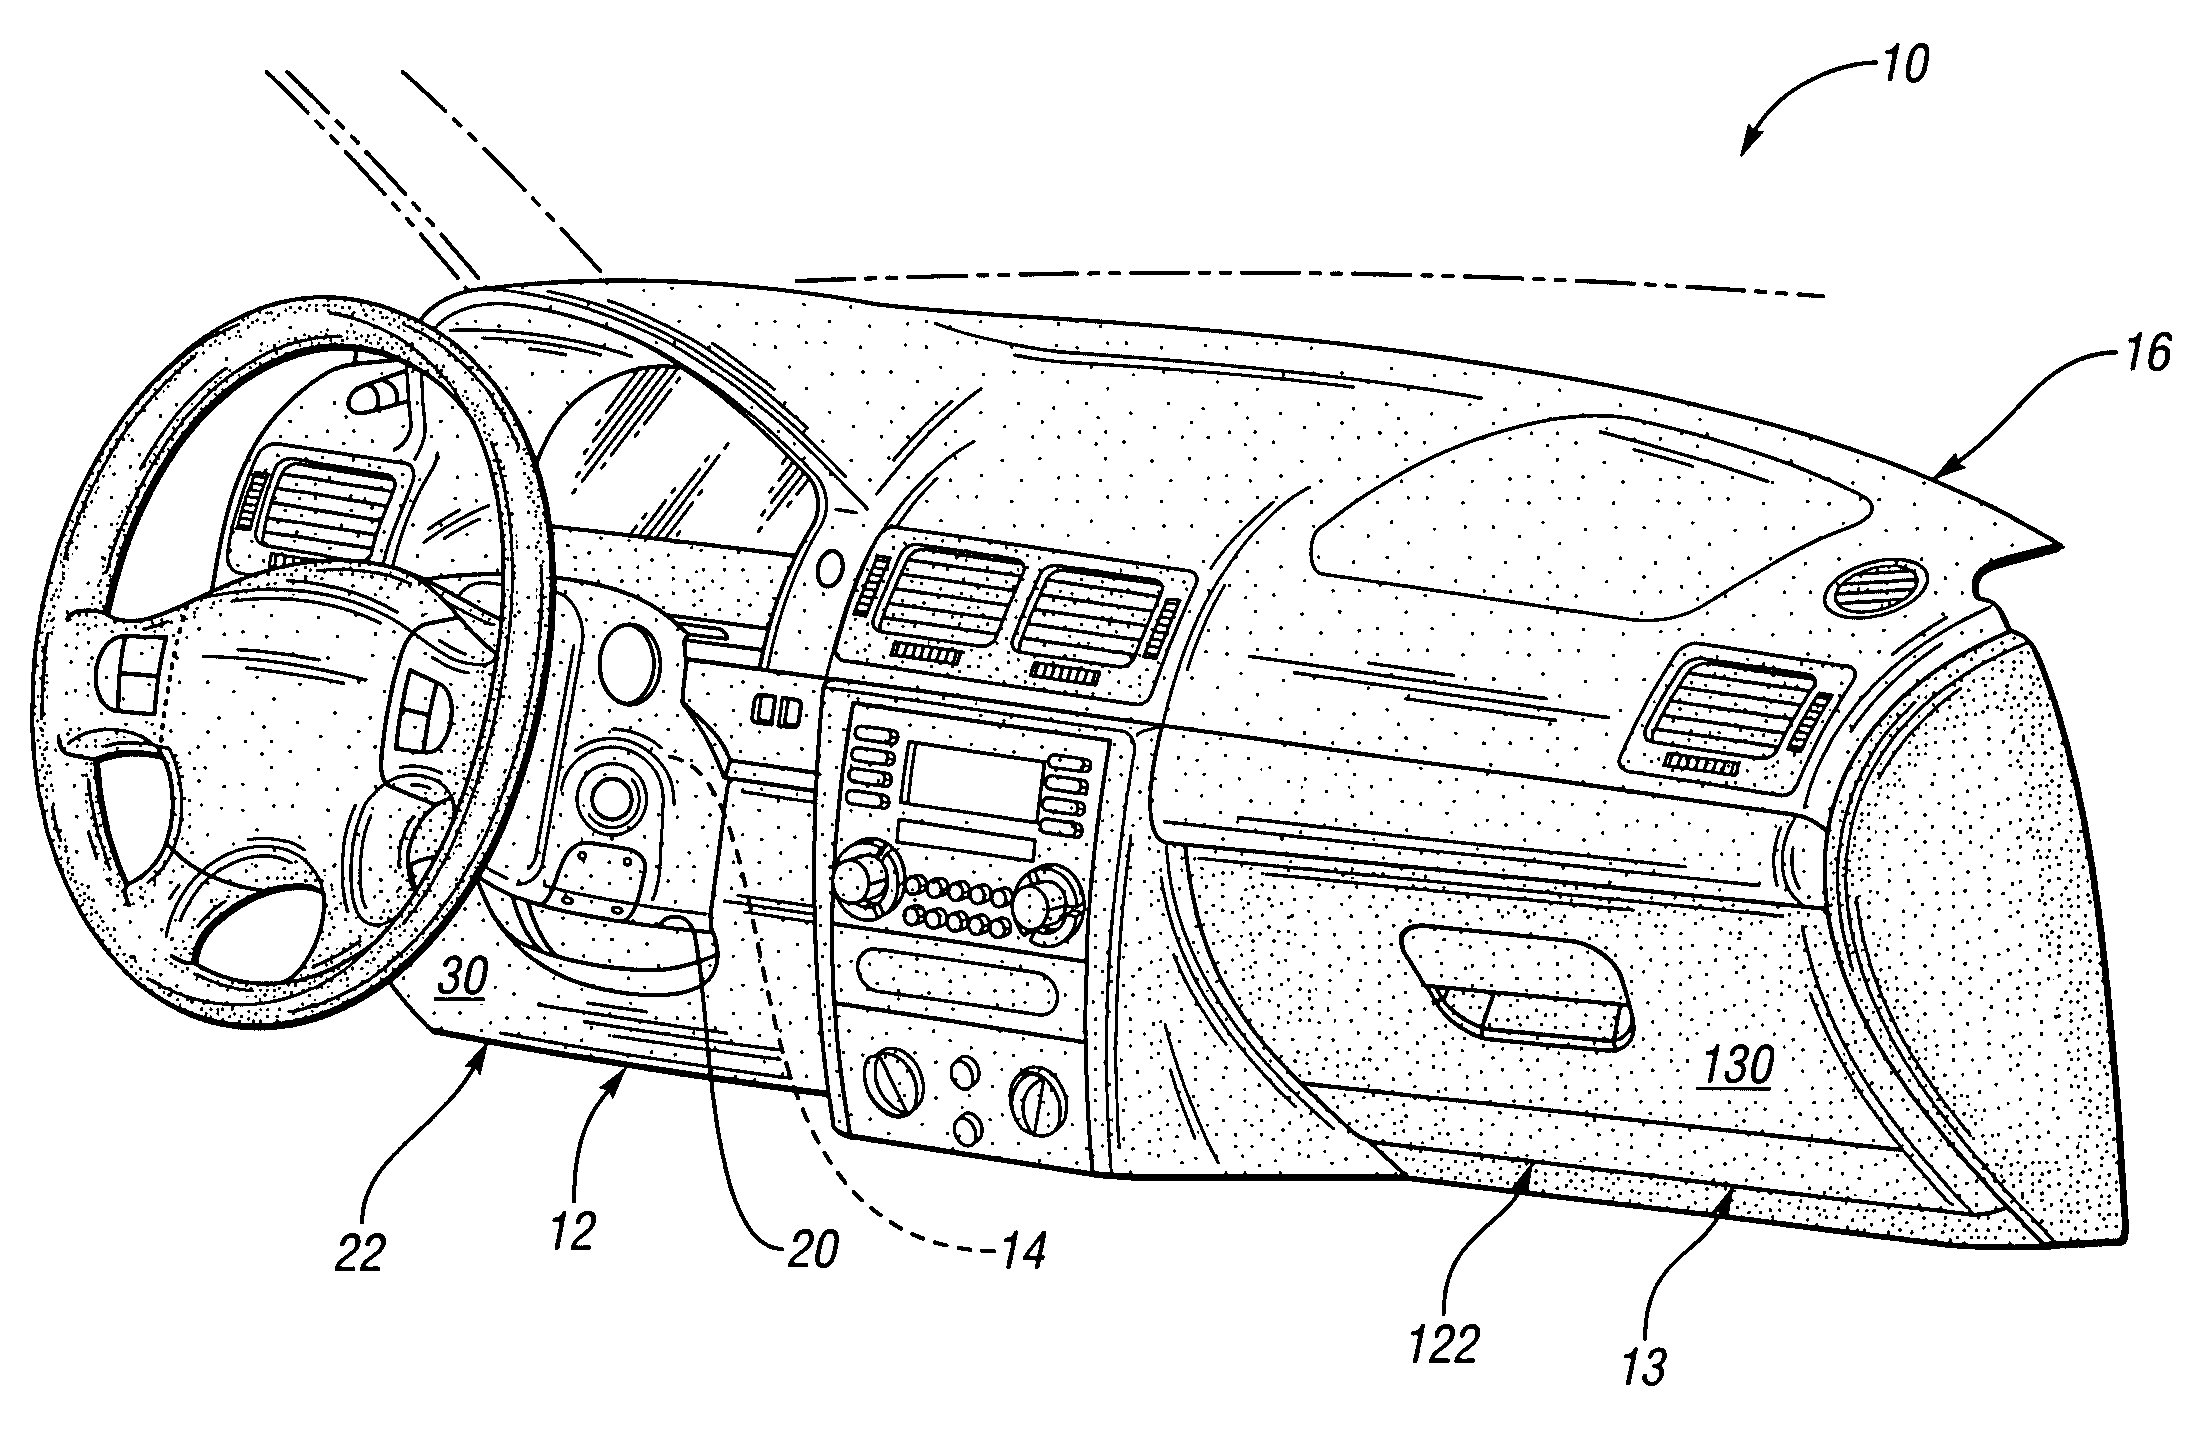 Energy-absorbing bolster for an automotive instrument panel assembly